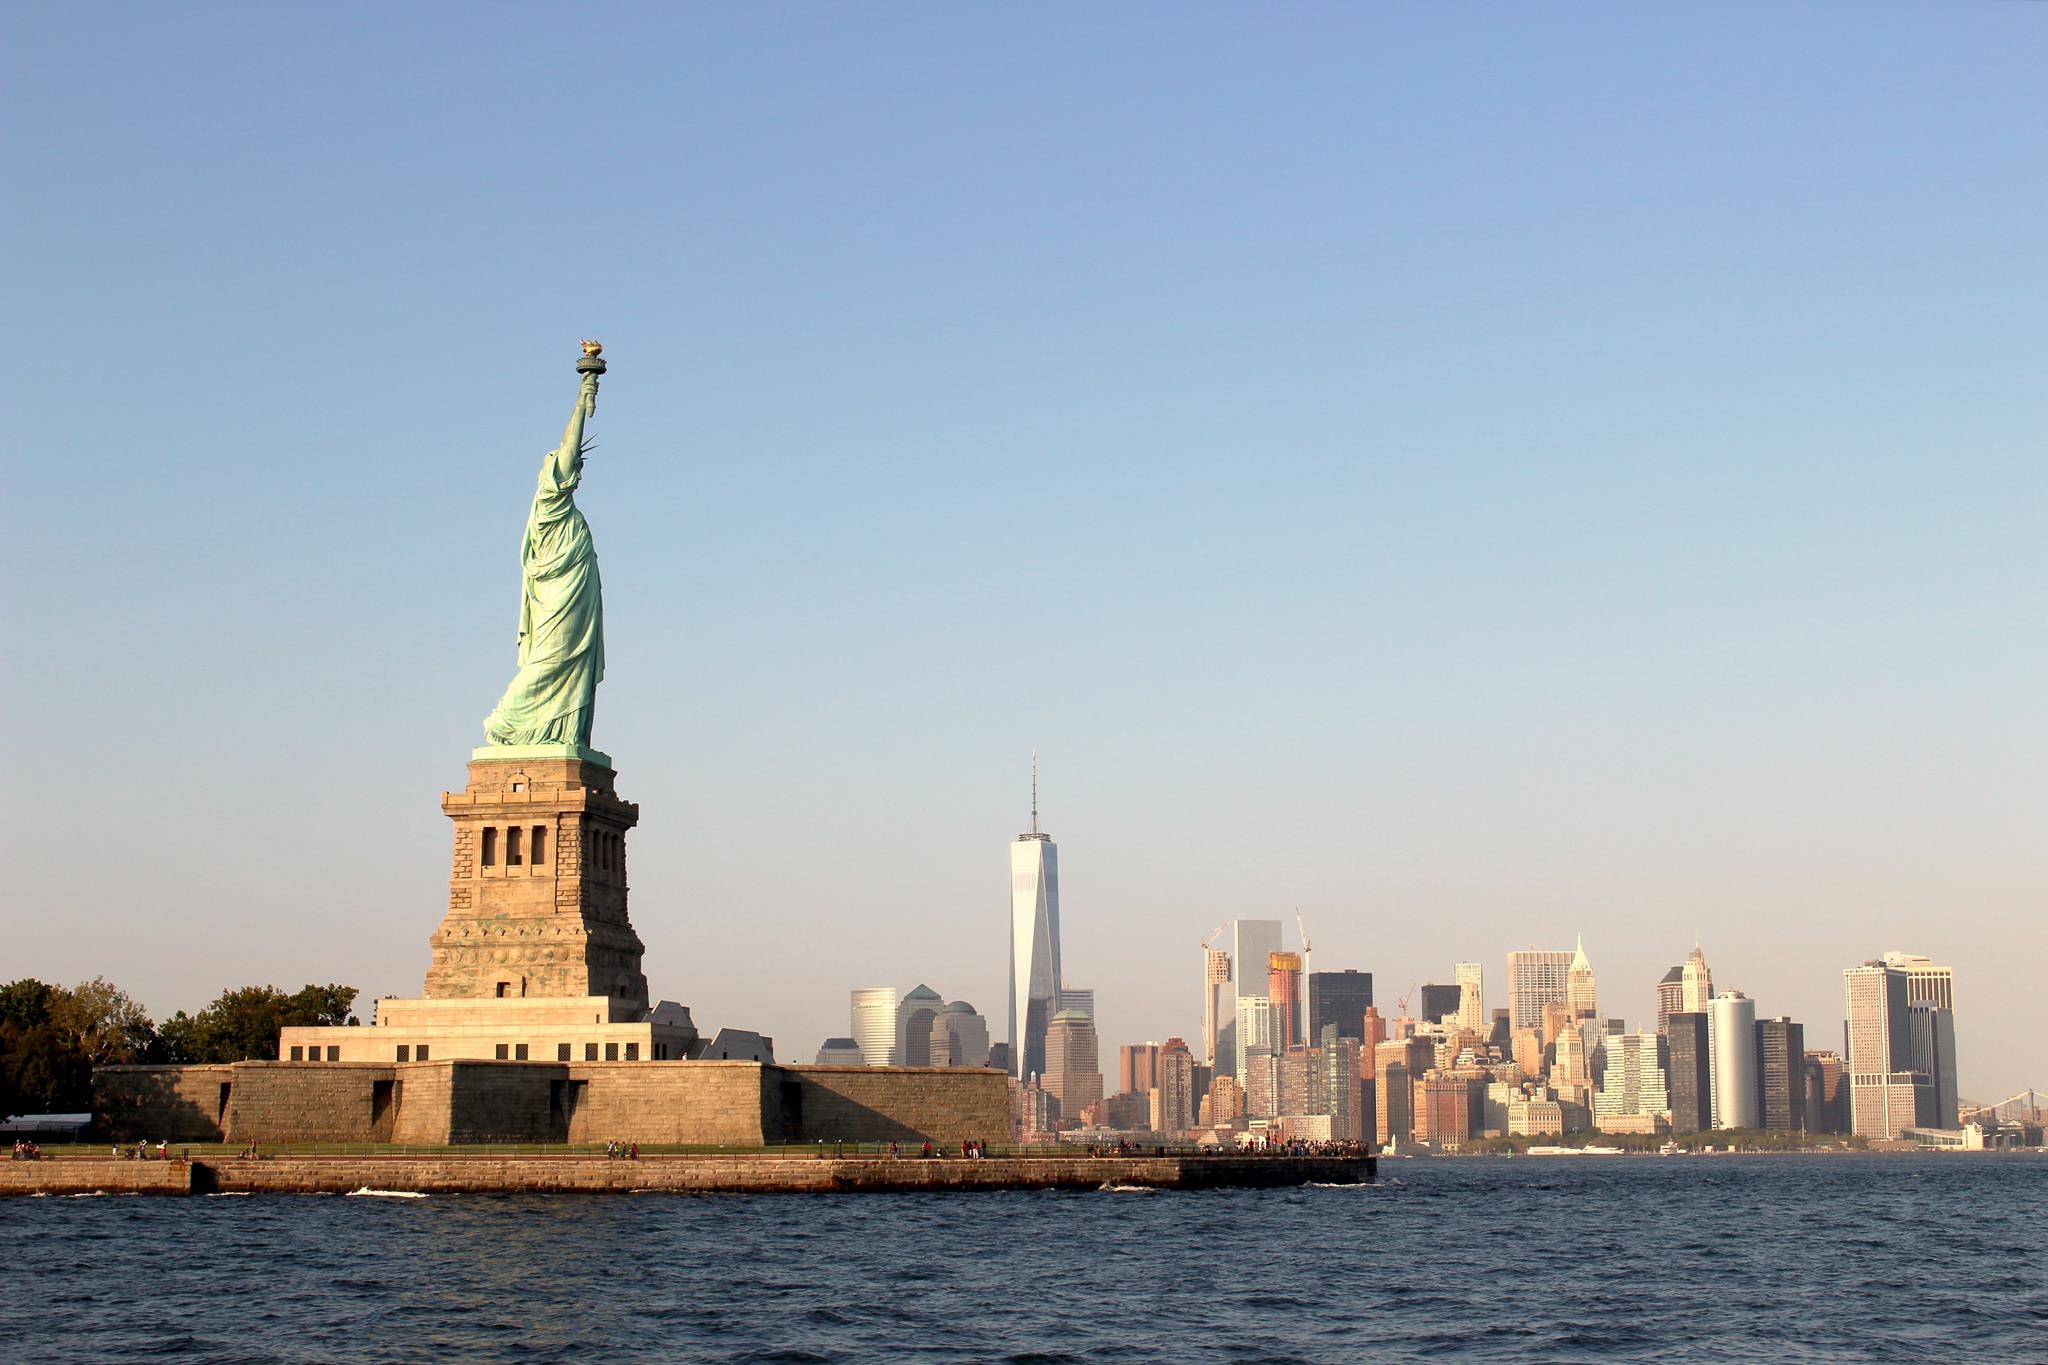 15 Best Places To Take a Photo With the Statue of Liberty